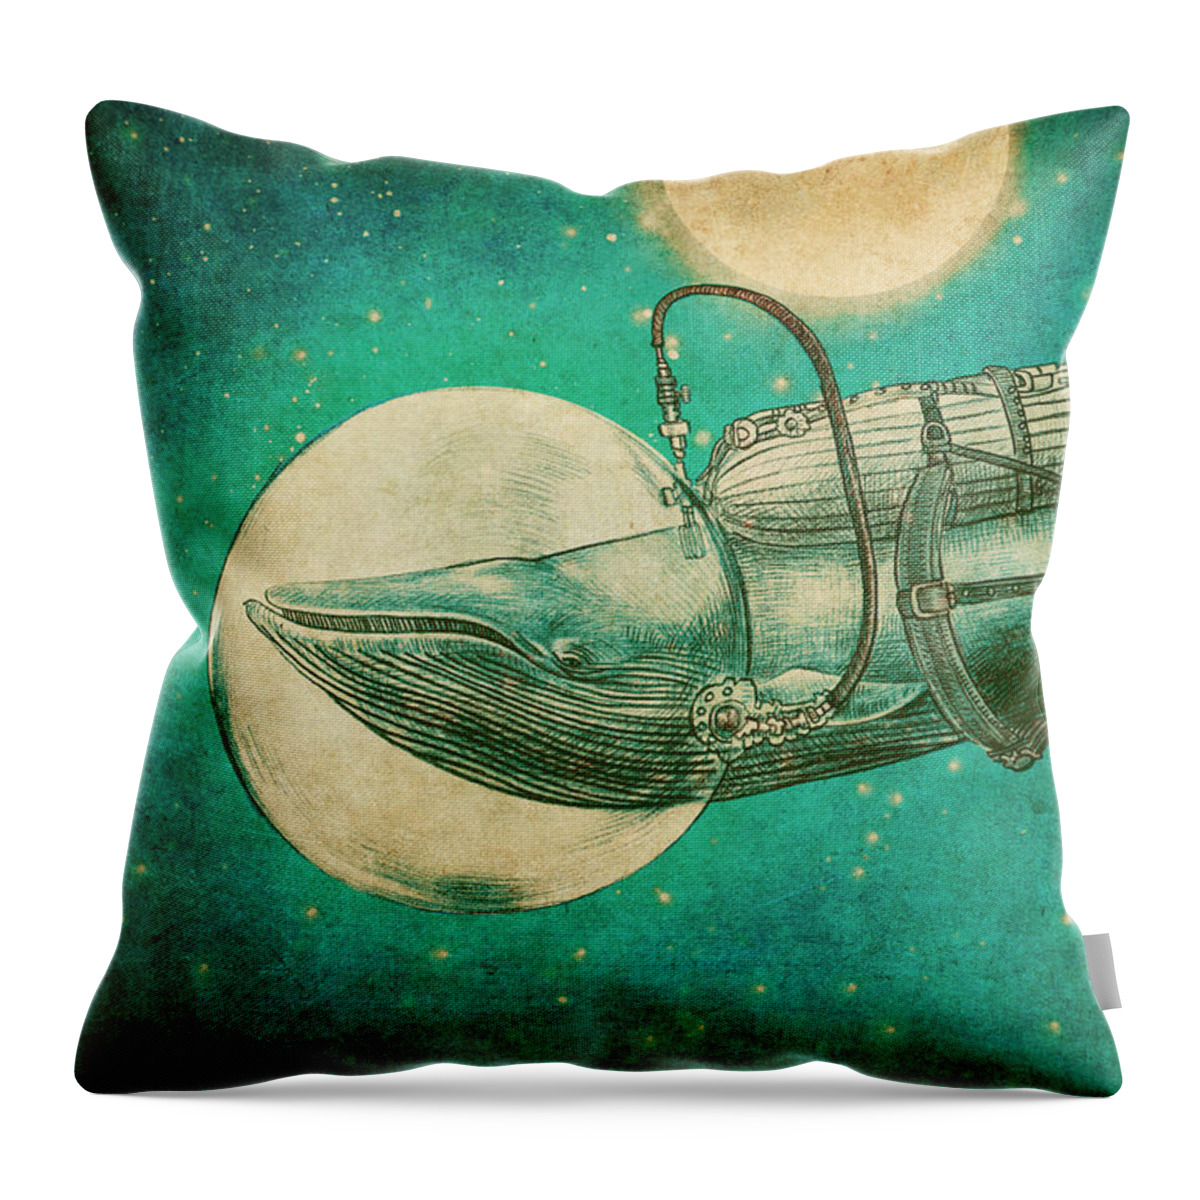 Whale Throw Pillow featuring the drawing The Journey by Eric Fan